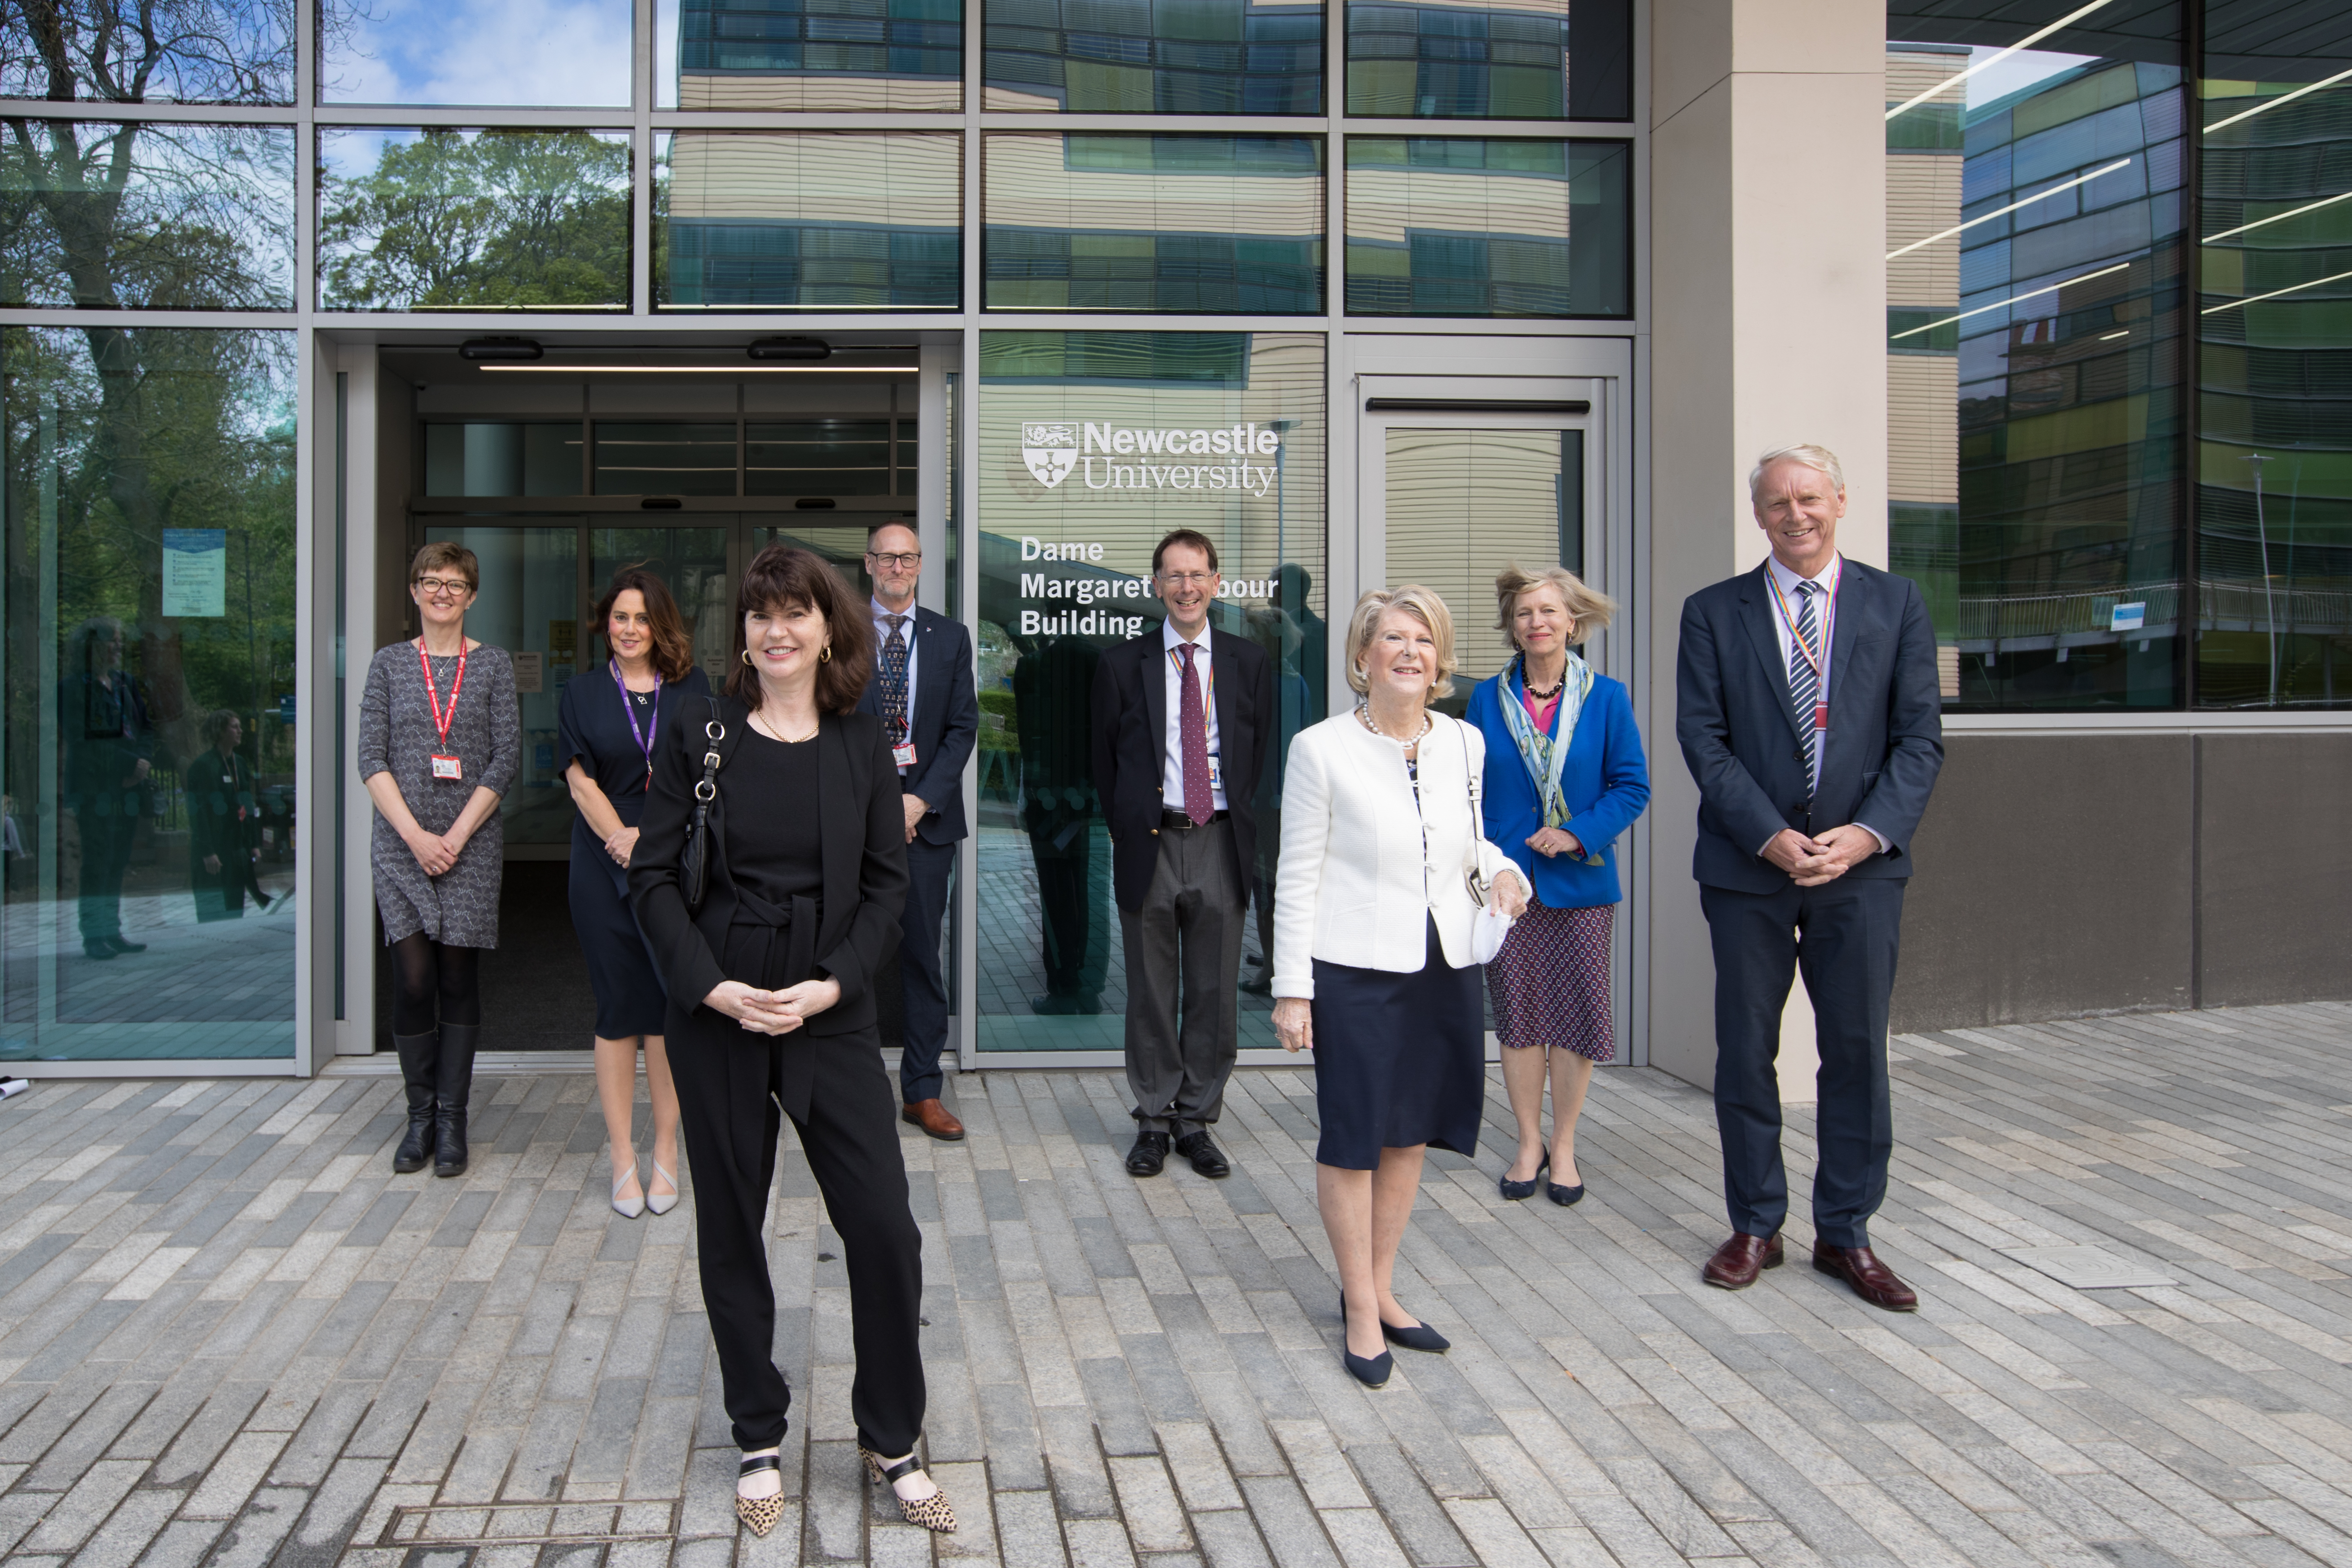 The Dame Margaret Barbour Building - in 2021, in recognition of the support The Barbour Foundation has given to Newcastle University since 2012,  Dame Margaret Barbour officially opened a new education facility named after her.